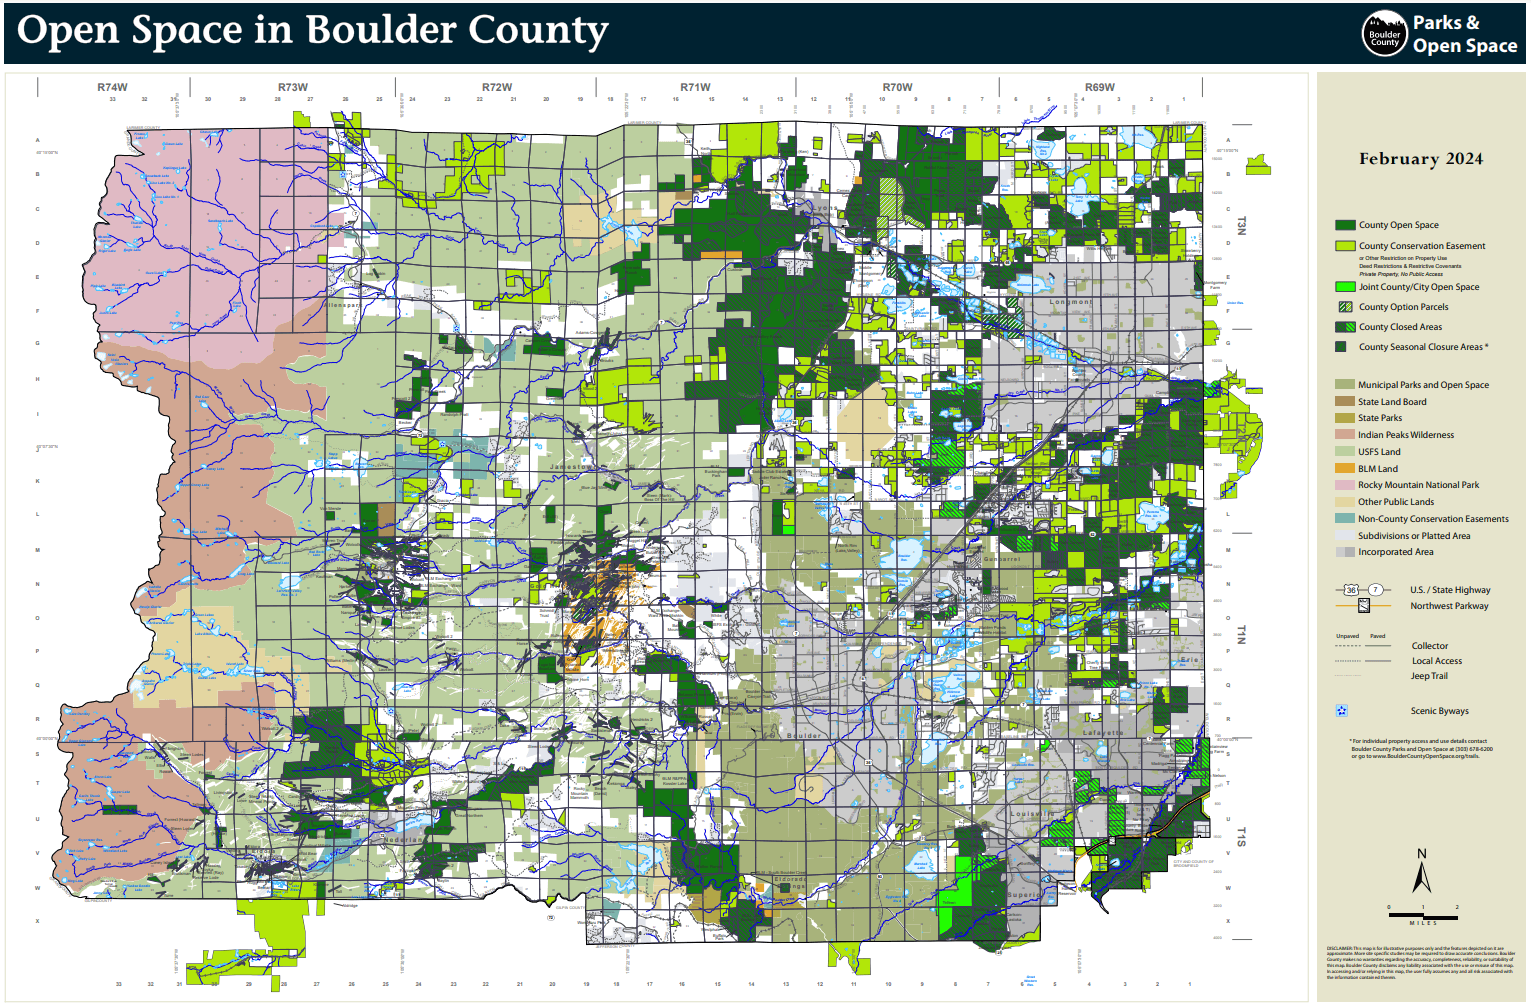 Map showing open space in Boulder County